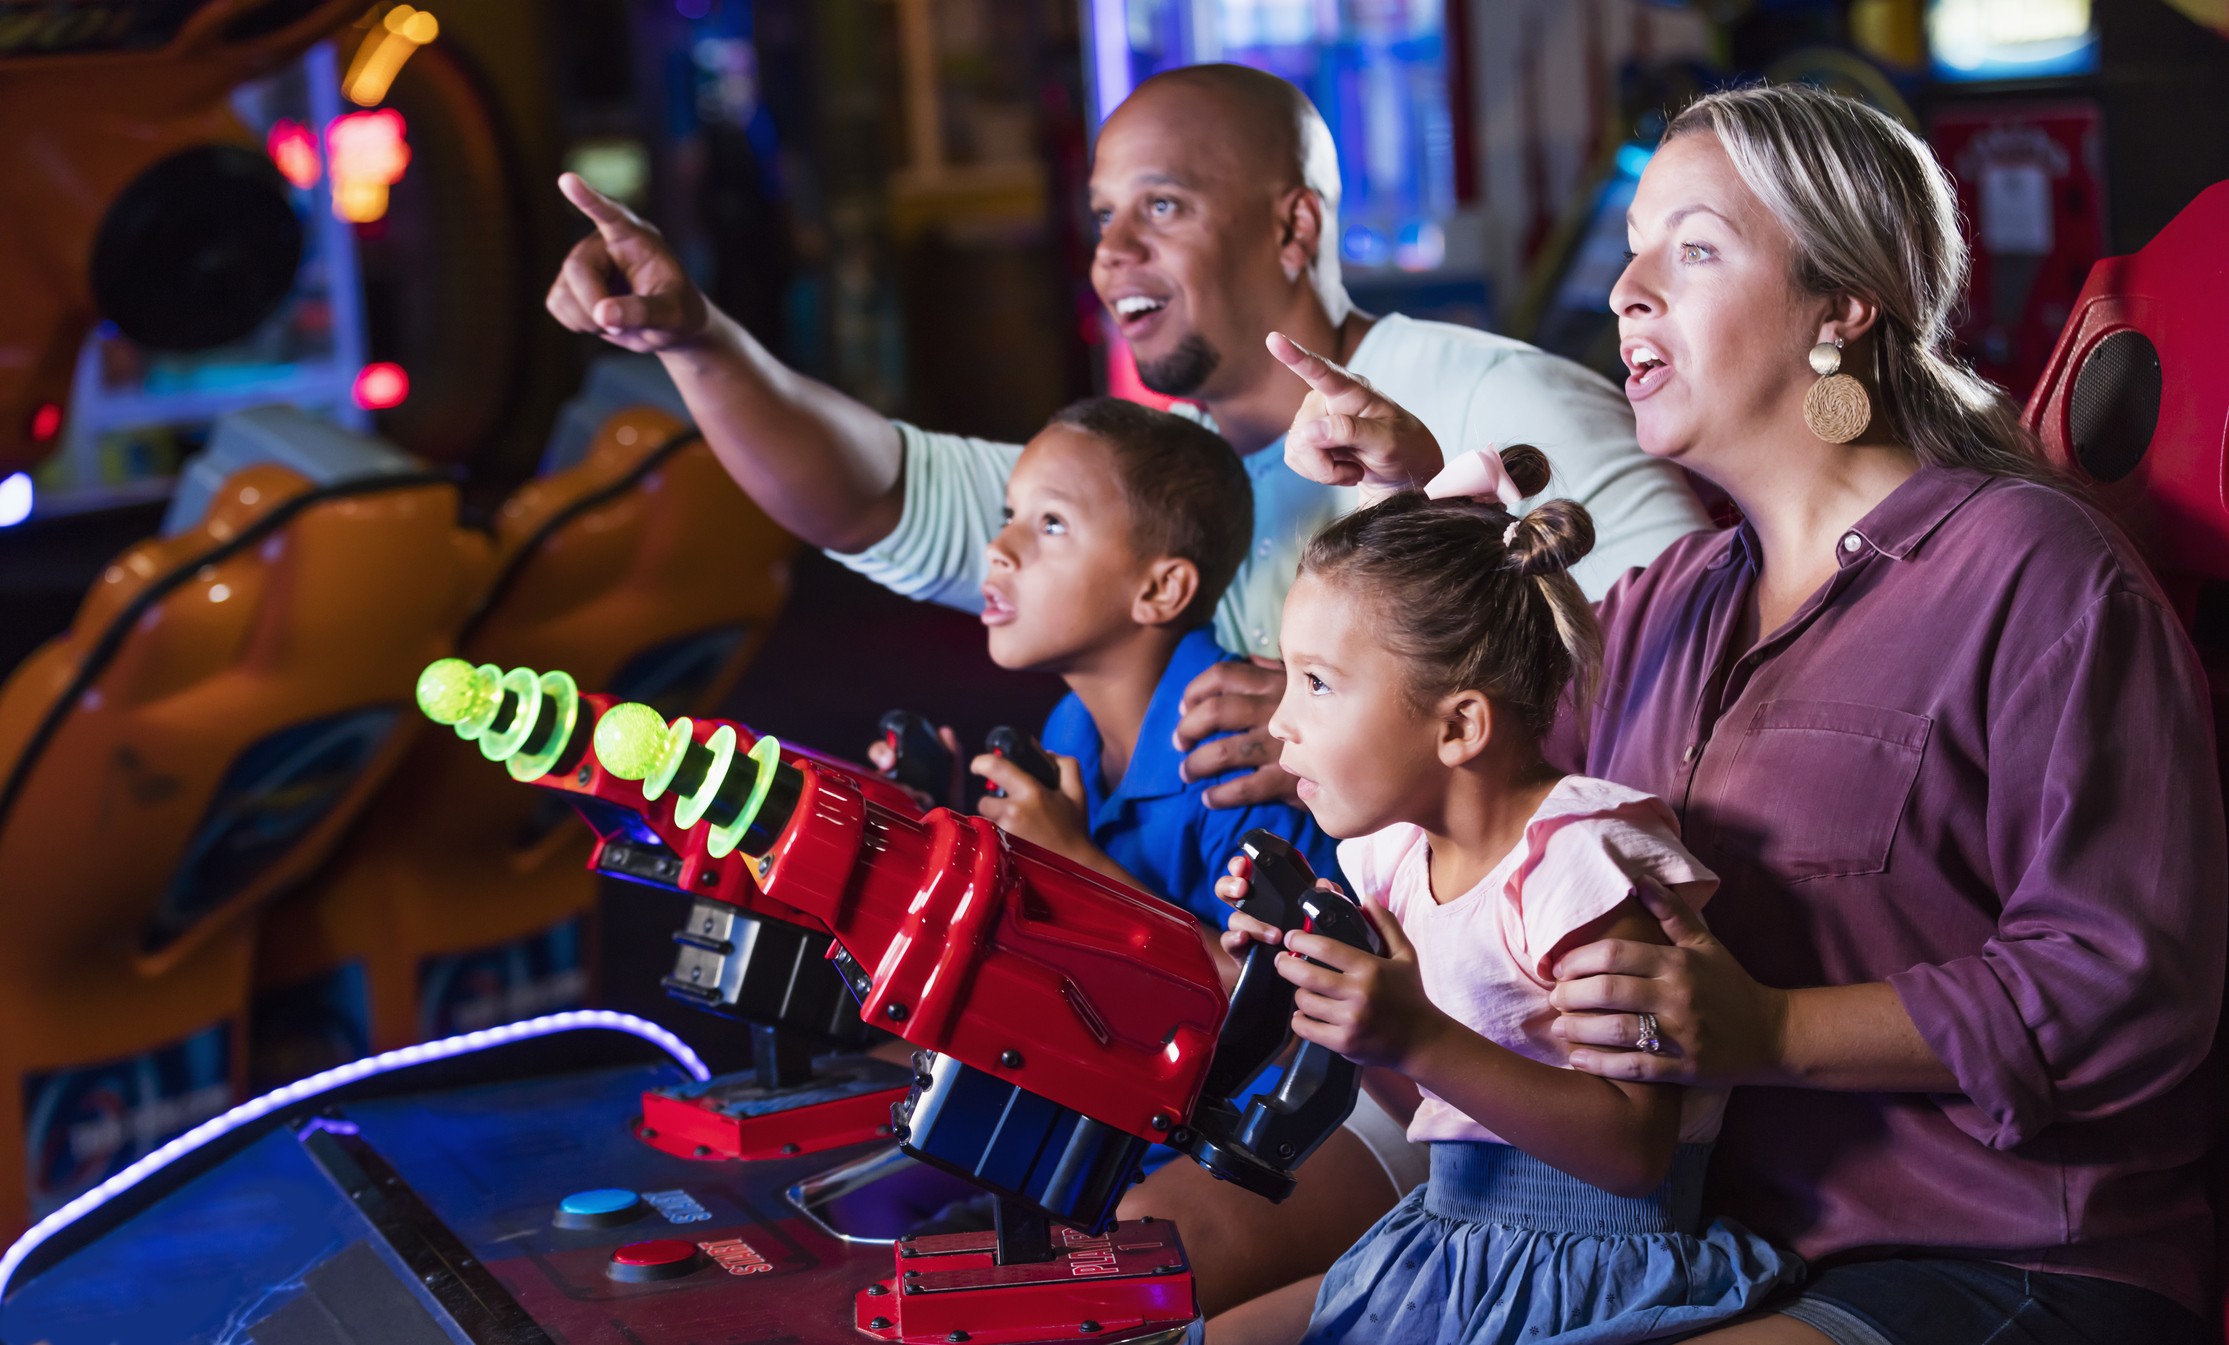 Children play arcade games, and mother and father point and teach their two children how to play the game in Mr. Gatti's Pizza franchise with the arcade games and ordering system.